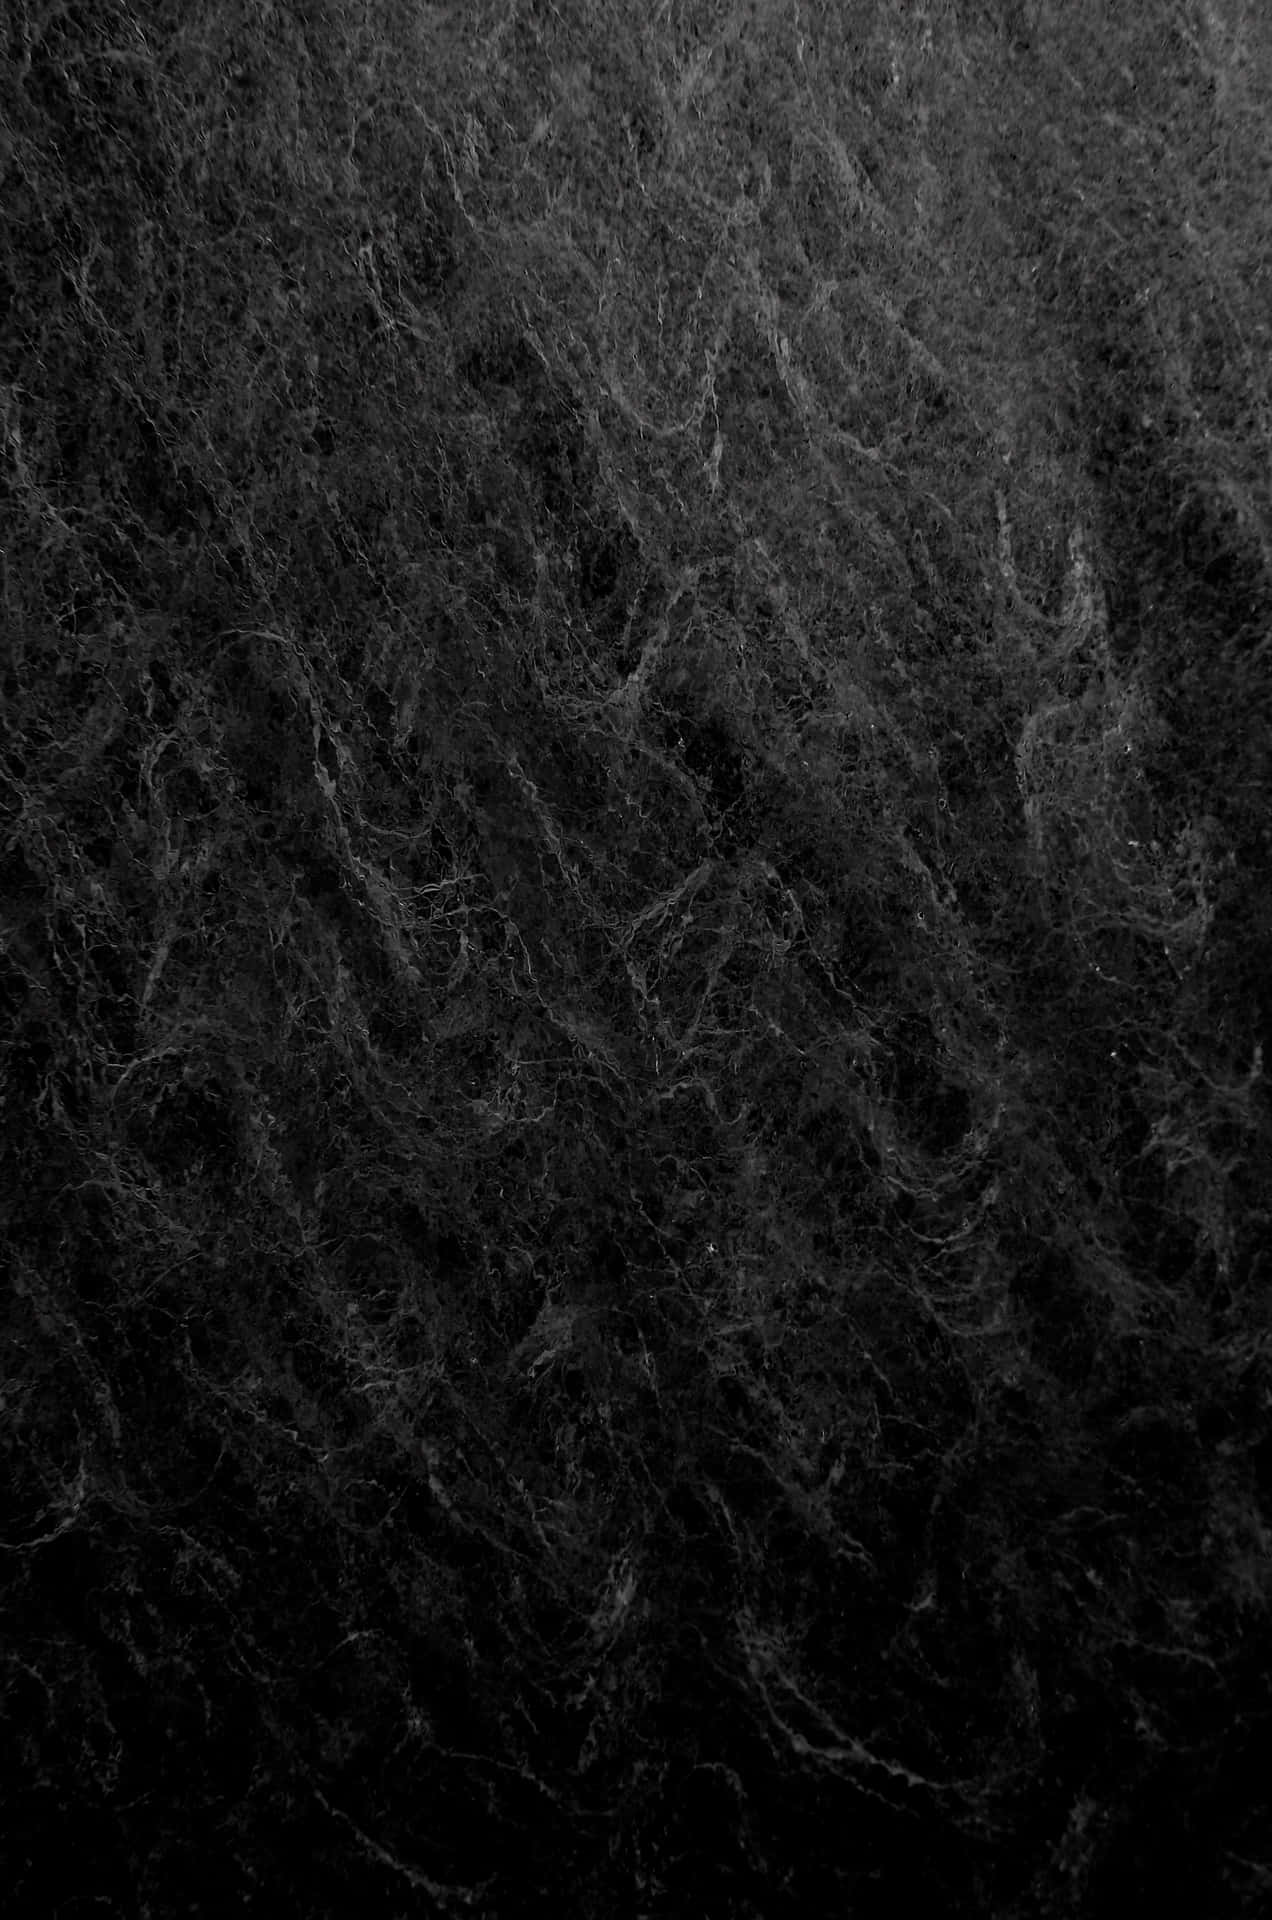 Intriguing Black and White Texture Wallpaper